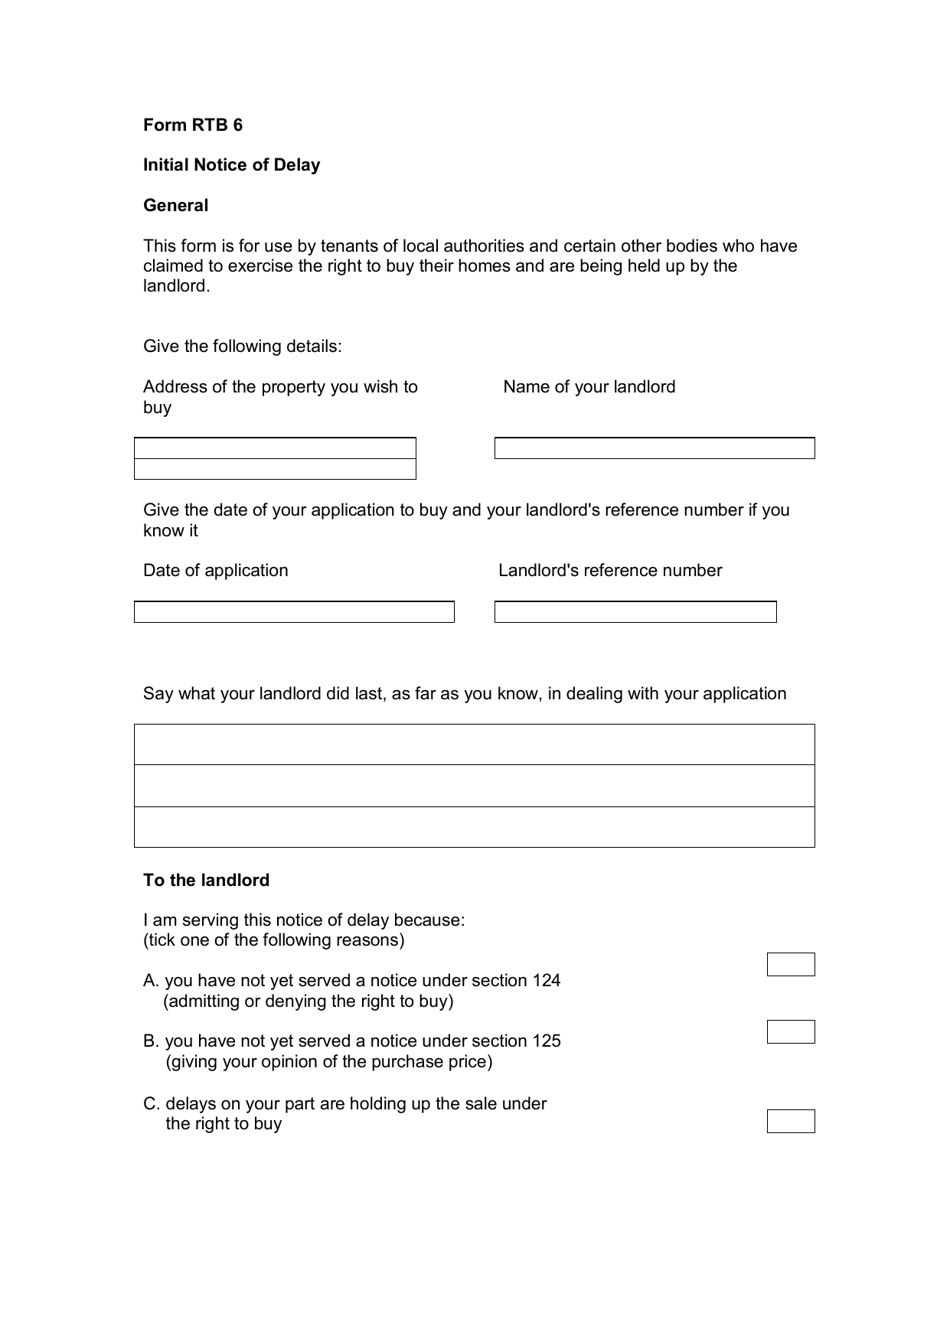 Form RTB6 Initial Notice of Delay - United Kingdom, Page 1